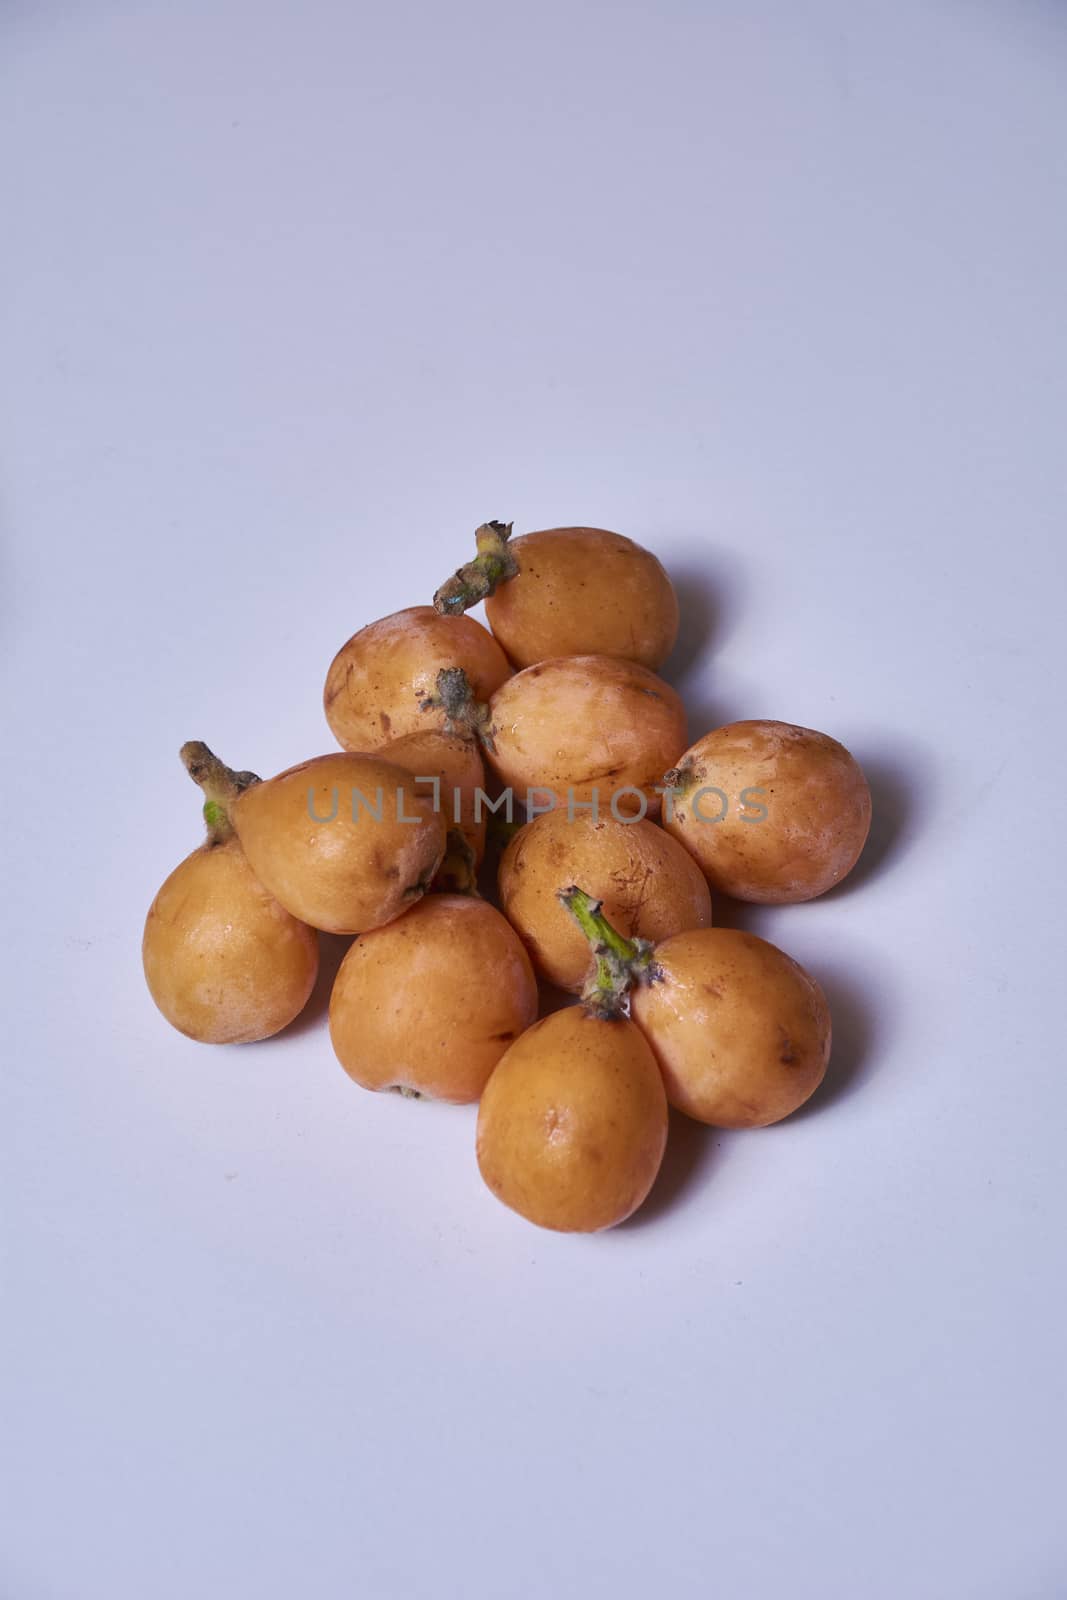 Set of medlars in order on white table, natural, ecological, without retouching